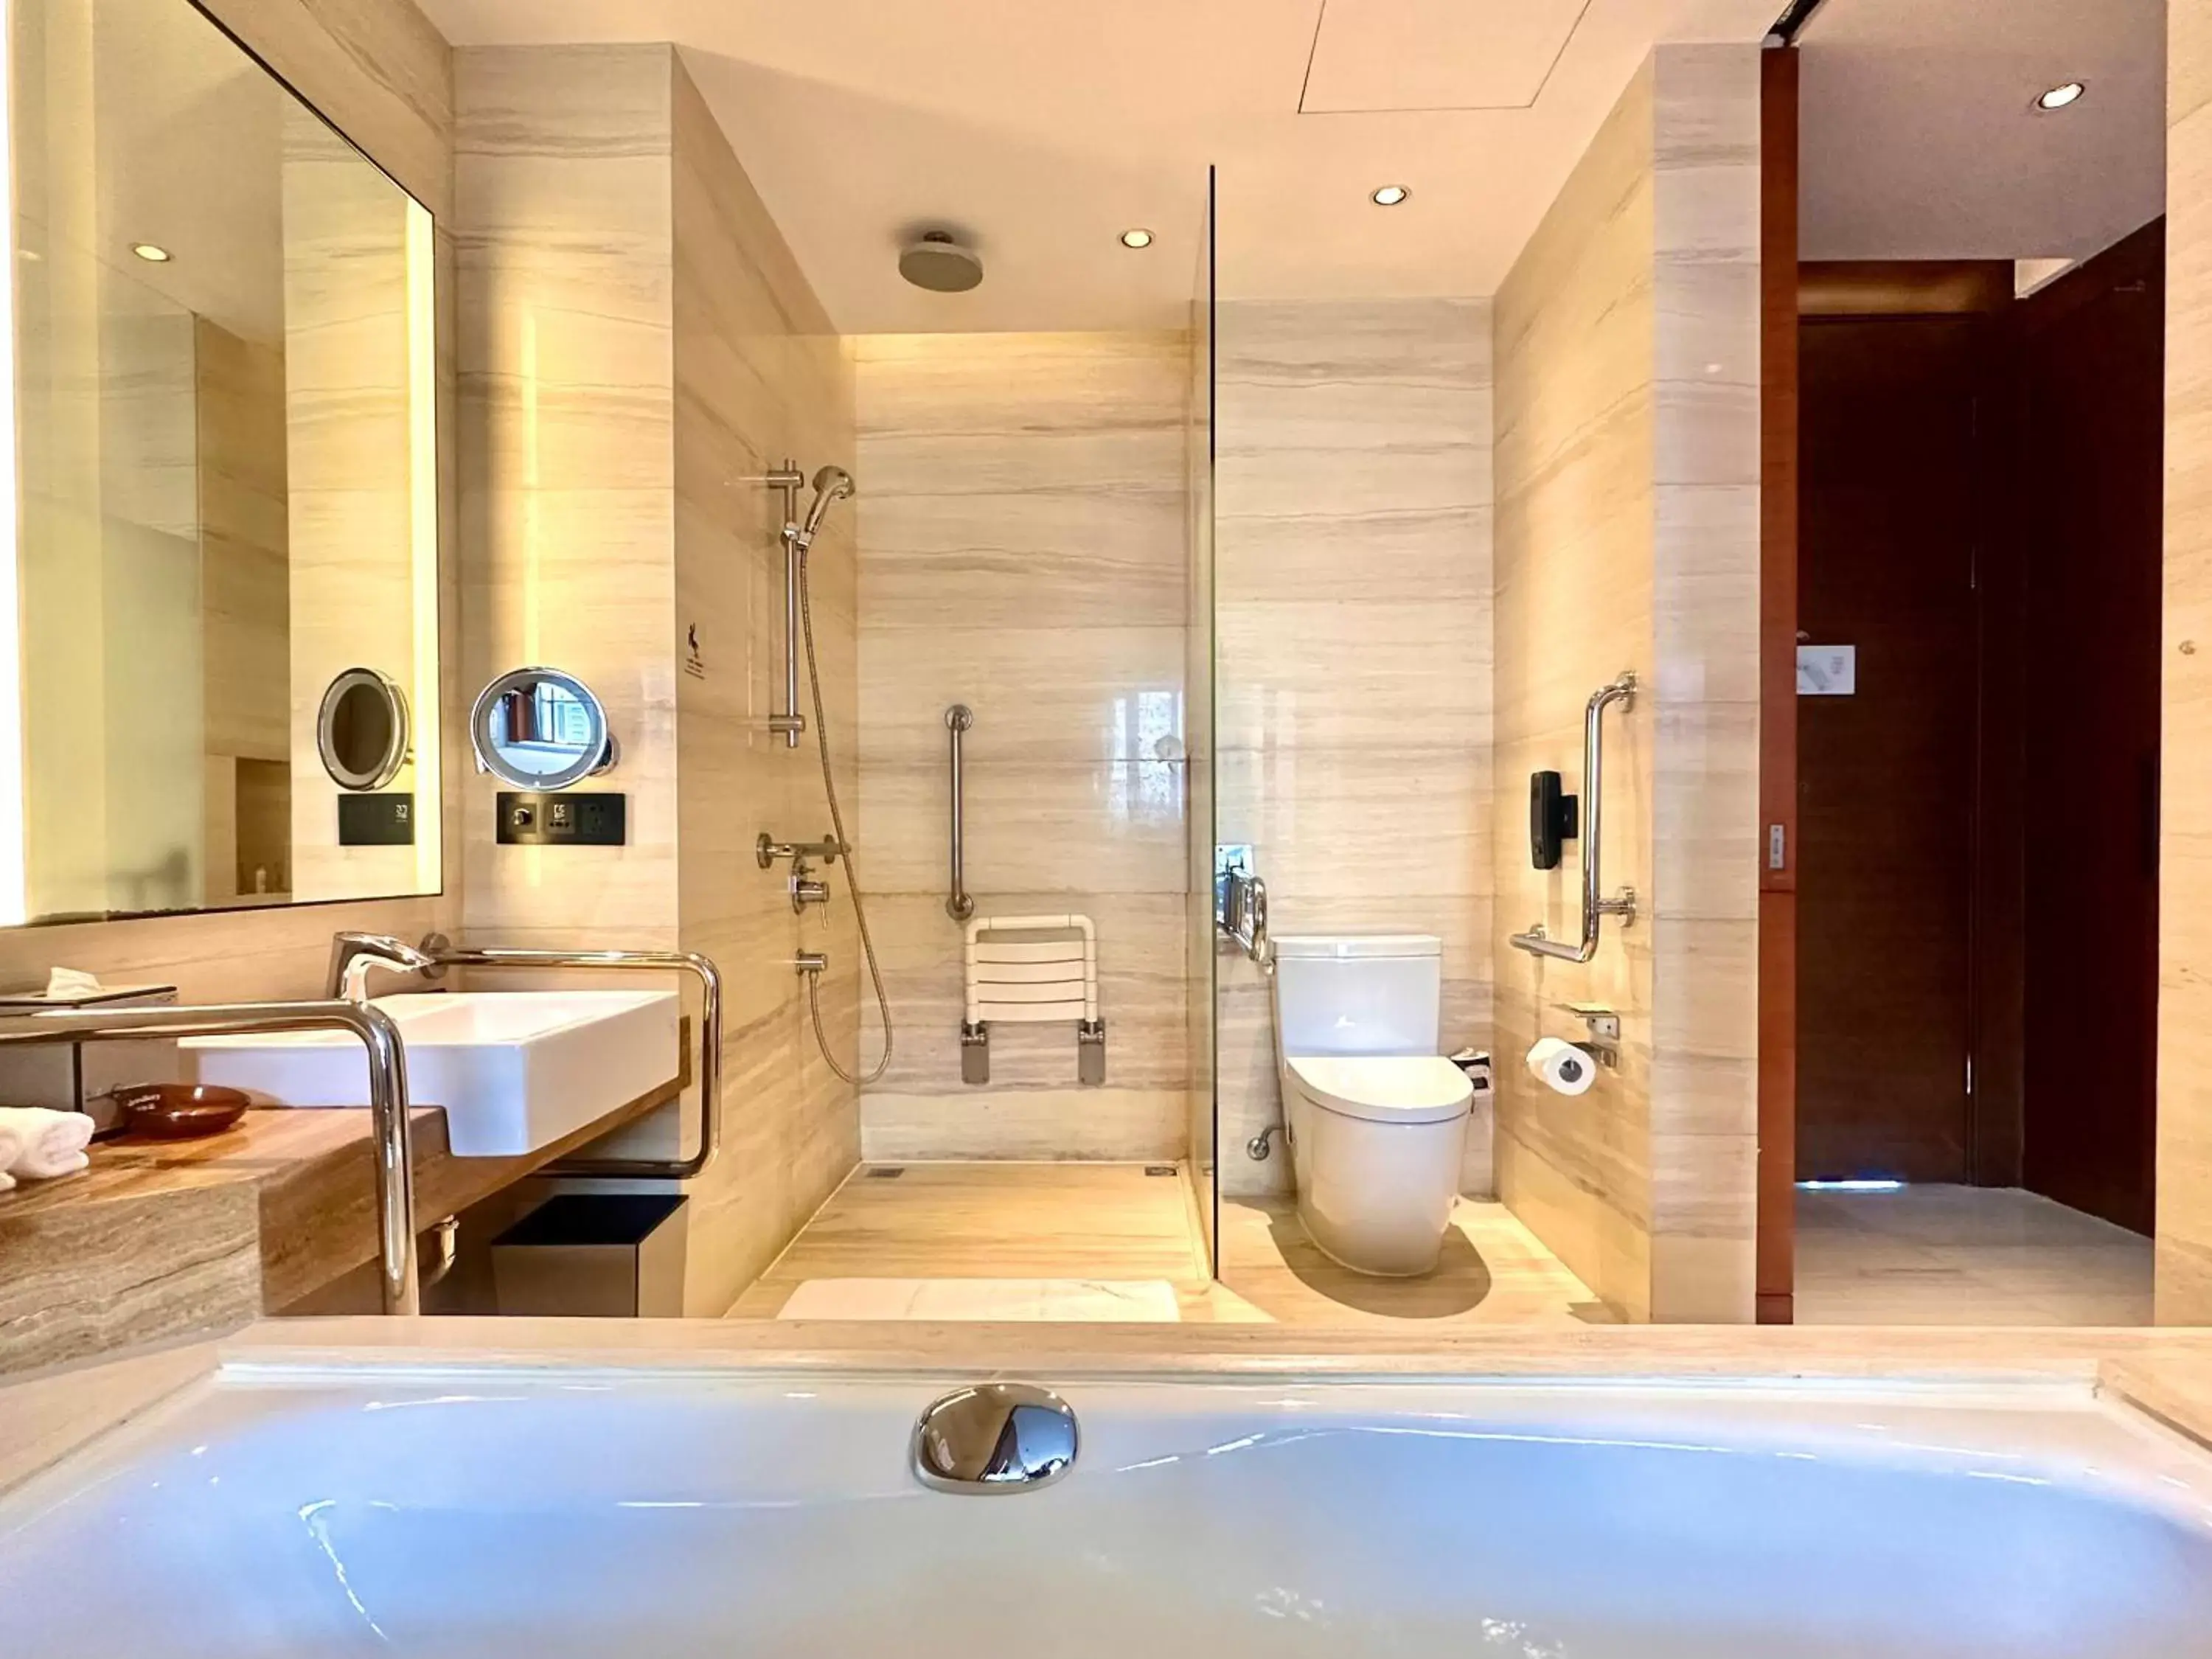 Bathroom in DoubleTree by Hilton Hotel Guangzhou - Science City